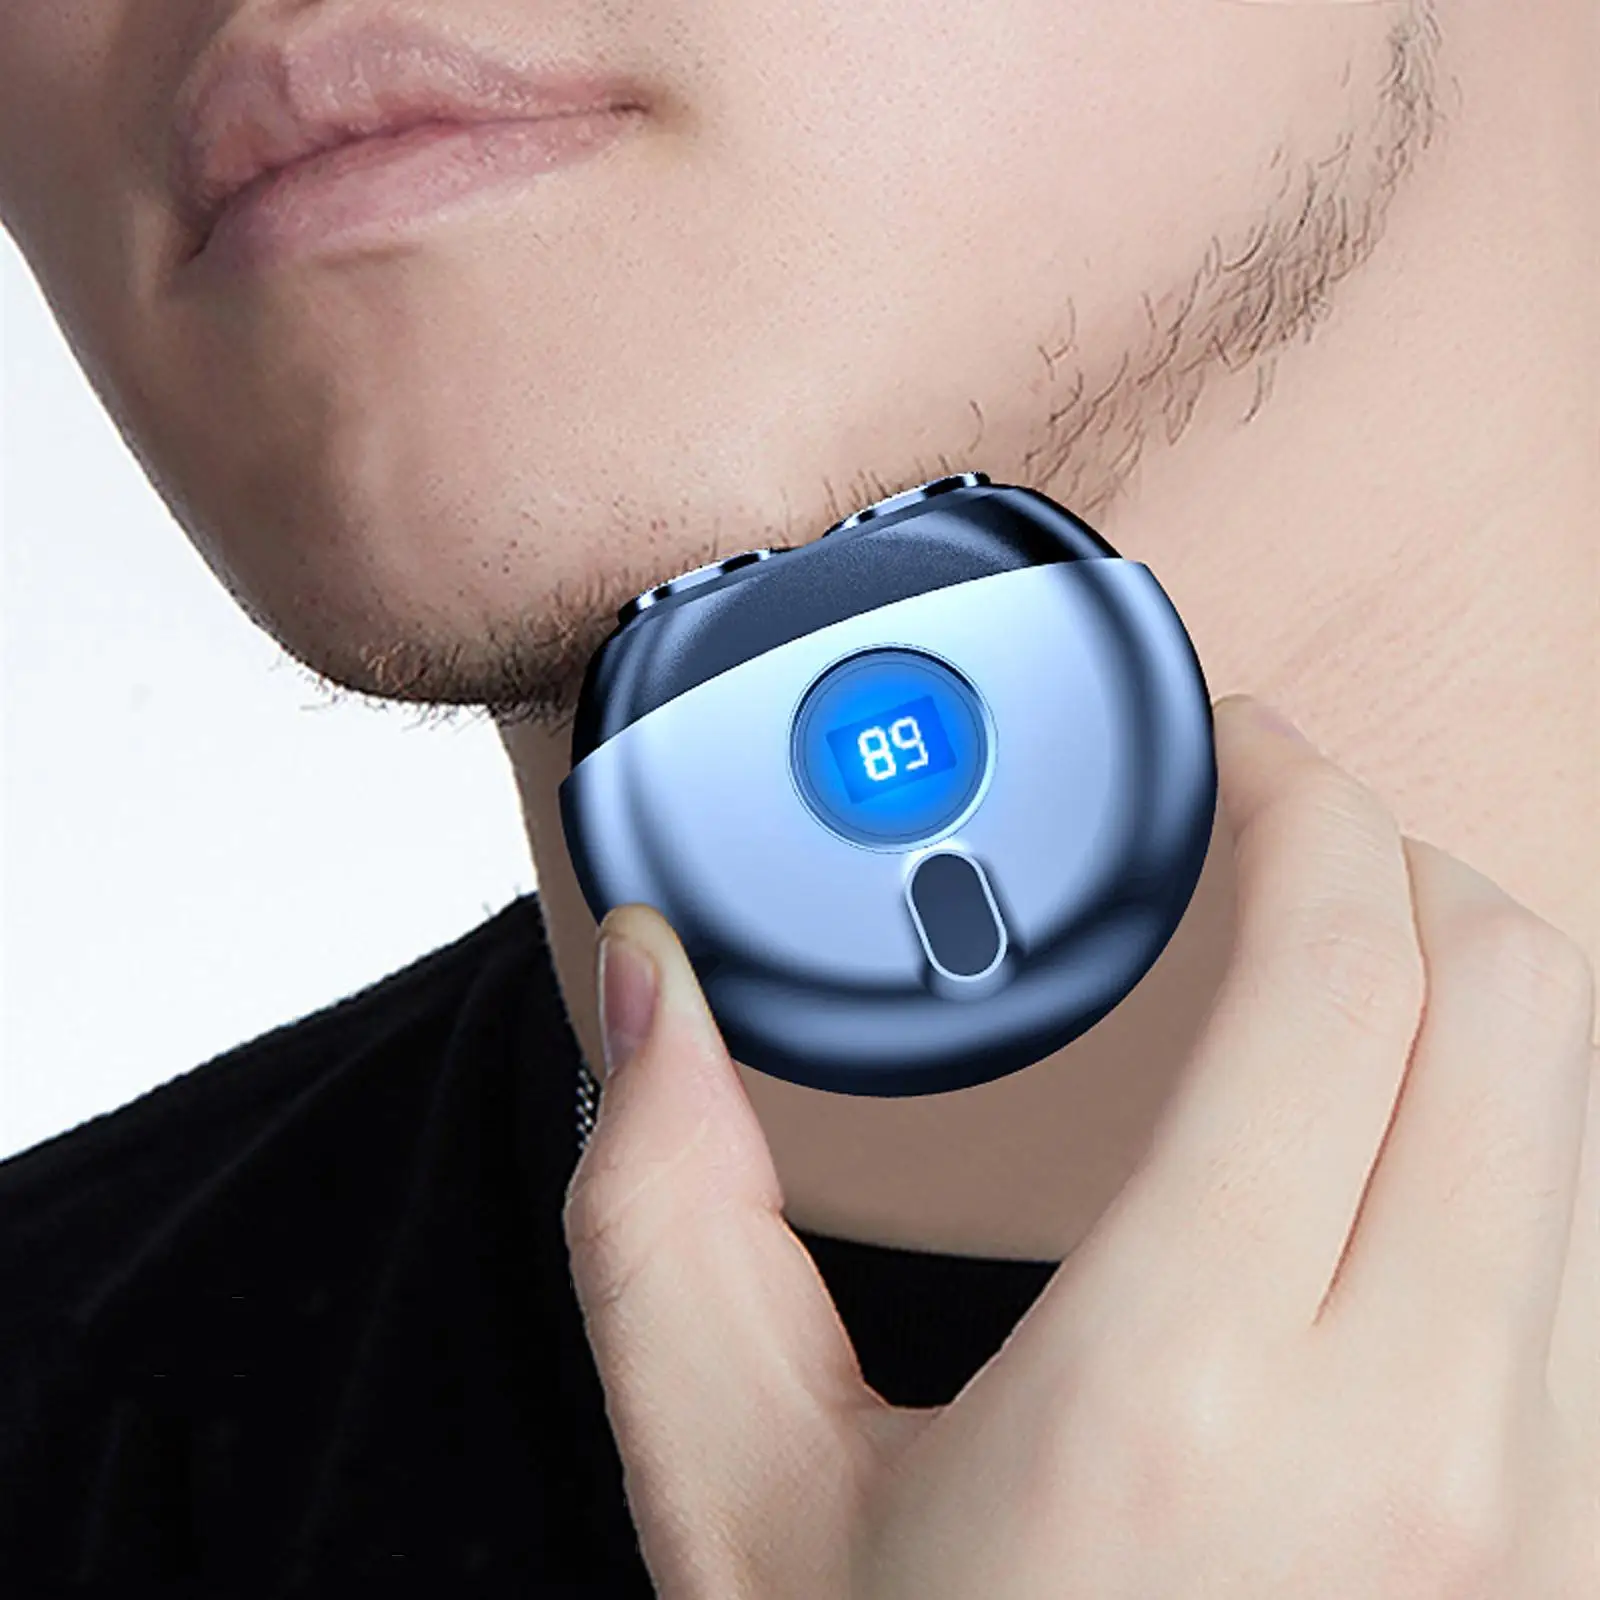 Mini Electric Shaver Hair Removal Detachable Head USB Rechargeable LED Indicator Shaving Machine Use Gift